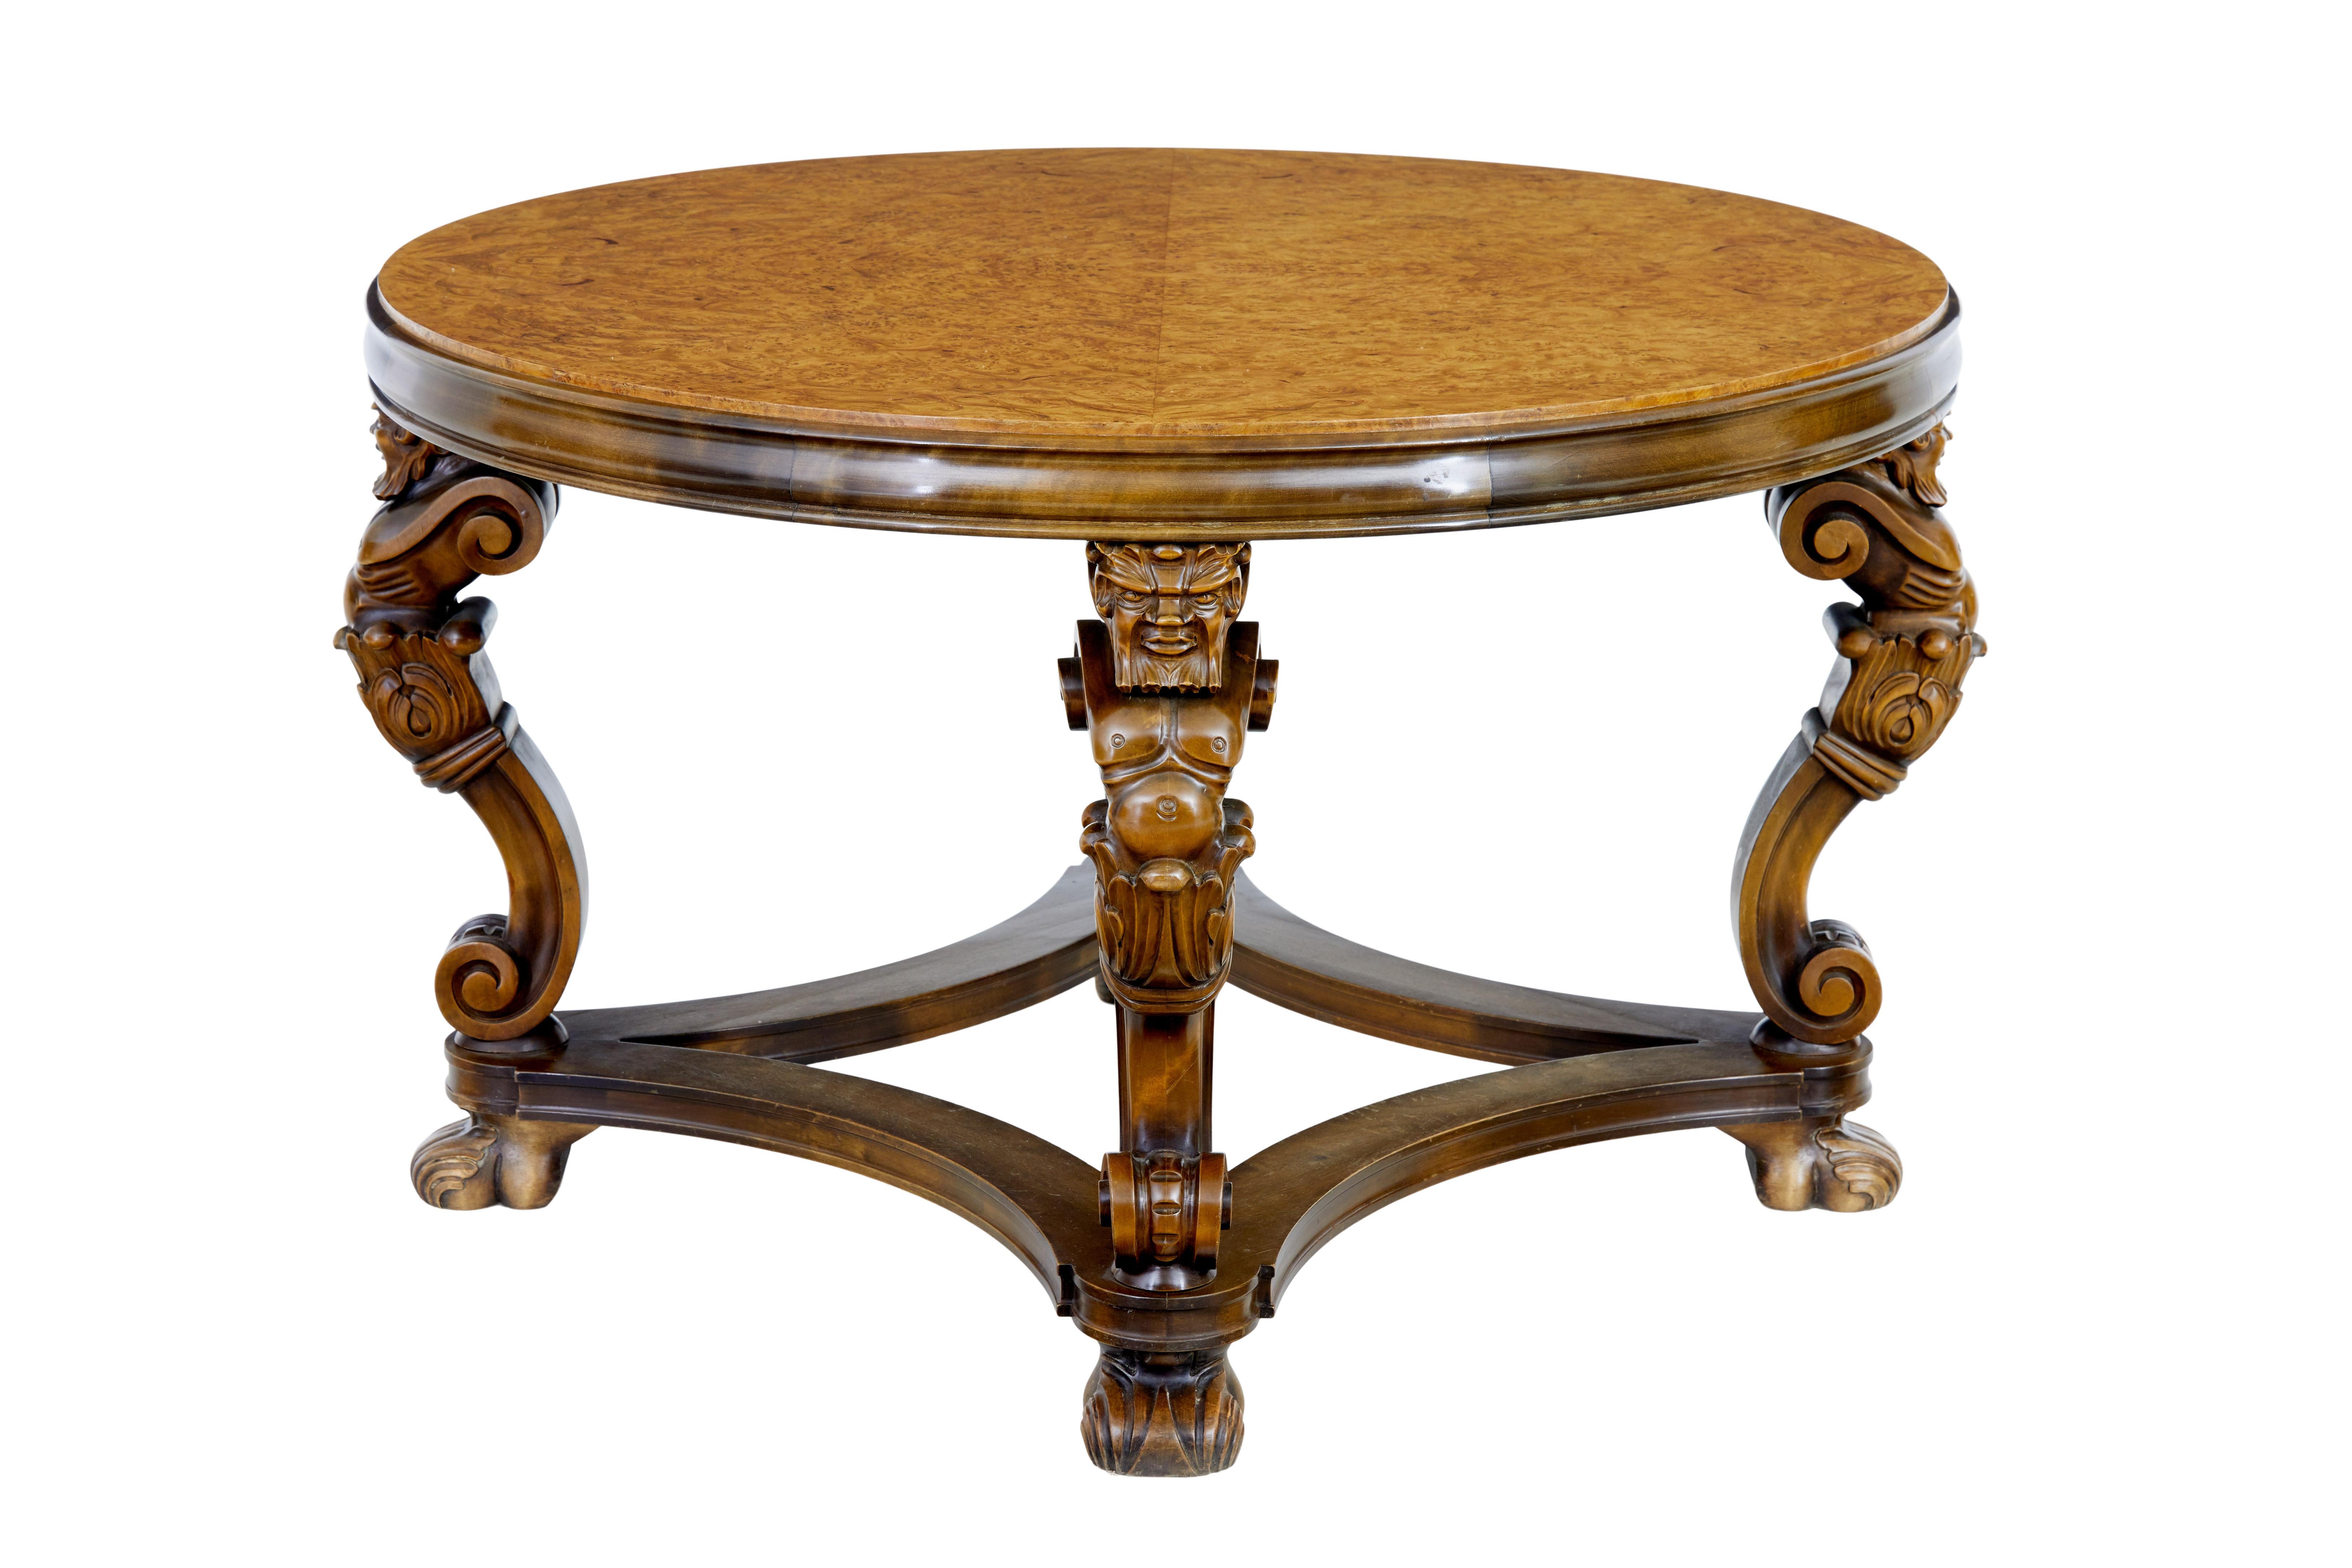 20th century carved burr birch coffee table circa 1950.

Fine quality Art Deco inspired coffee table.

Stunning Swedish burr birch circular top.   4 carved grotesques form the legs, united by shaped stretcher.

Good colour.

Minor surface marks,